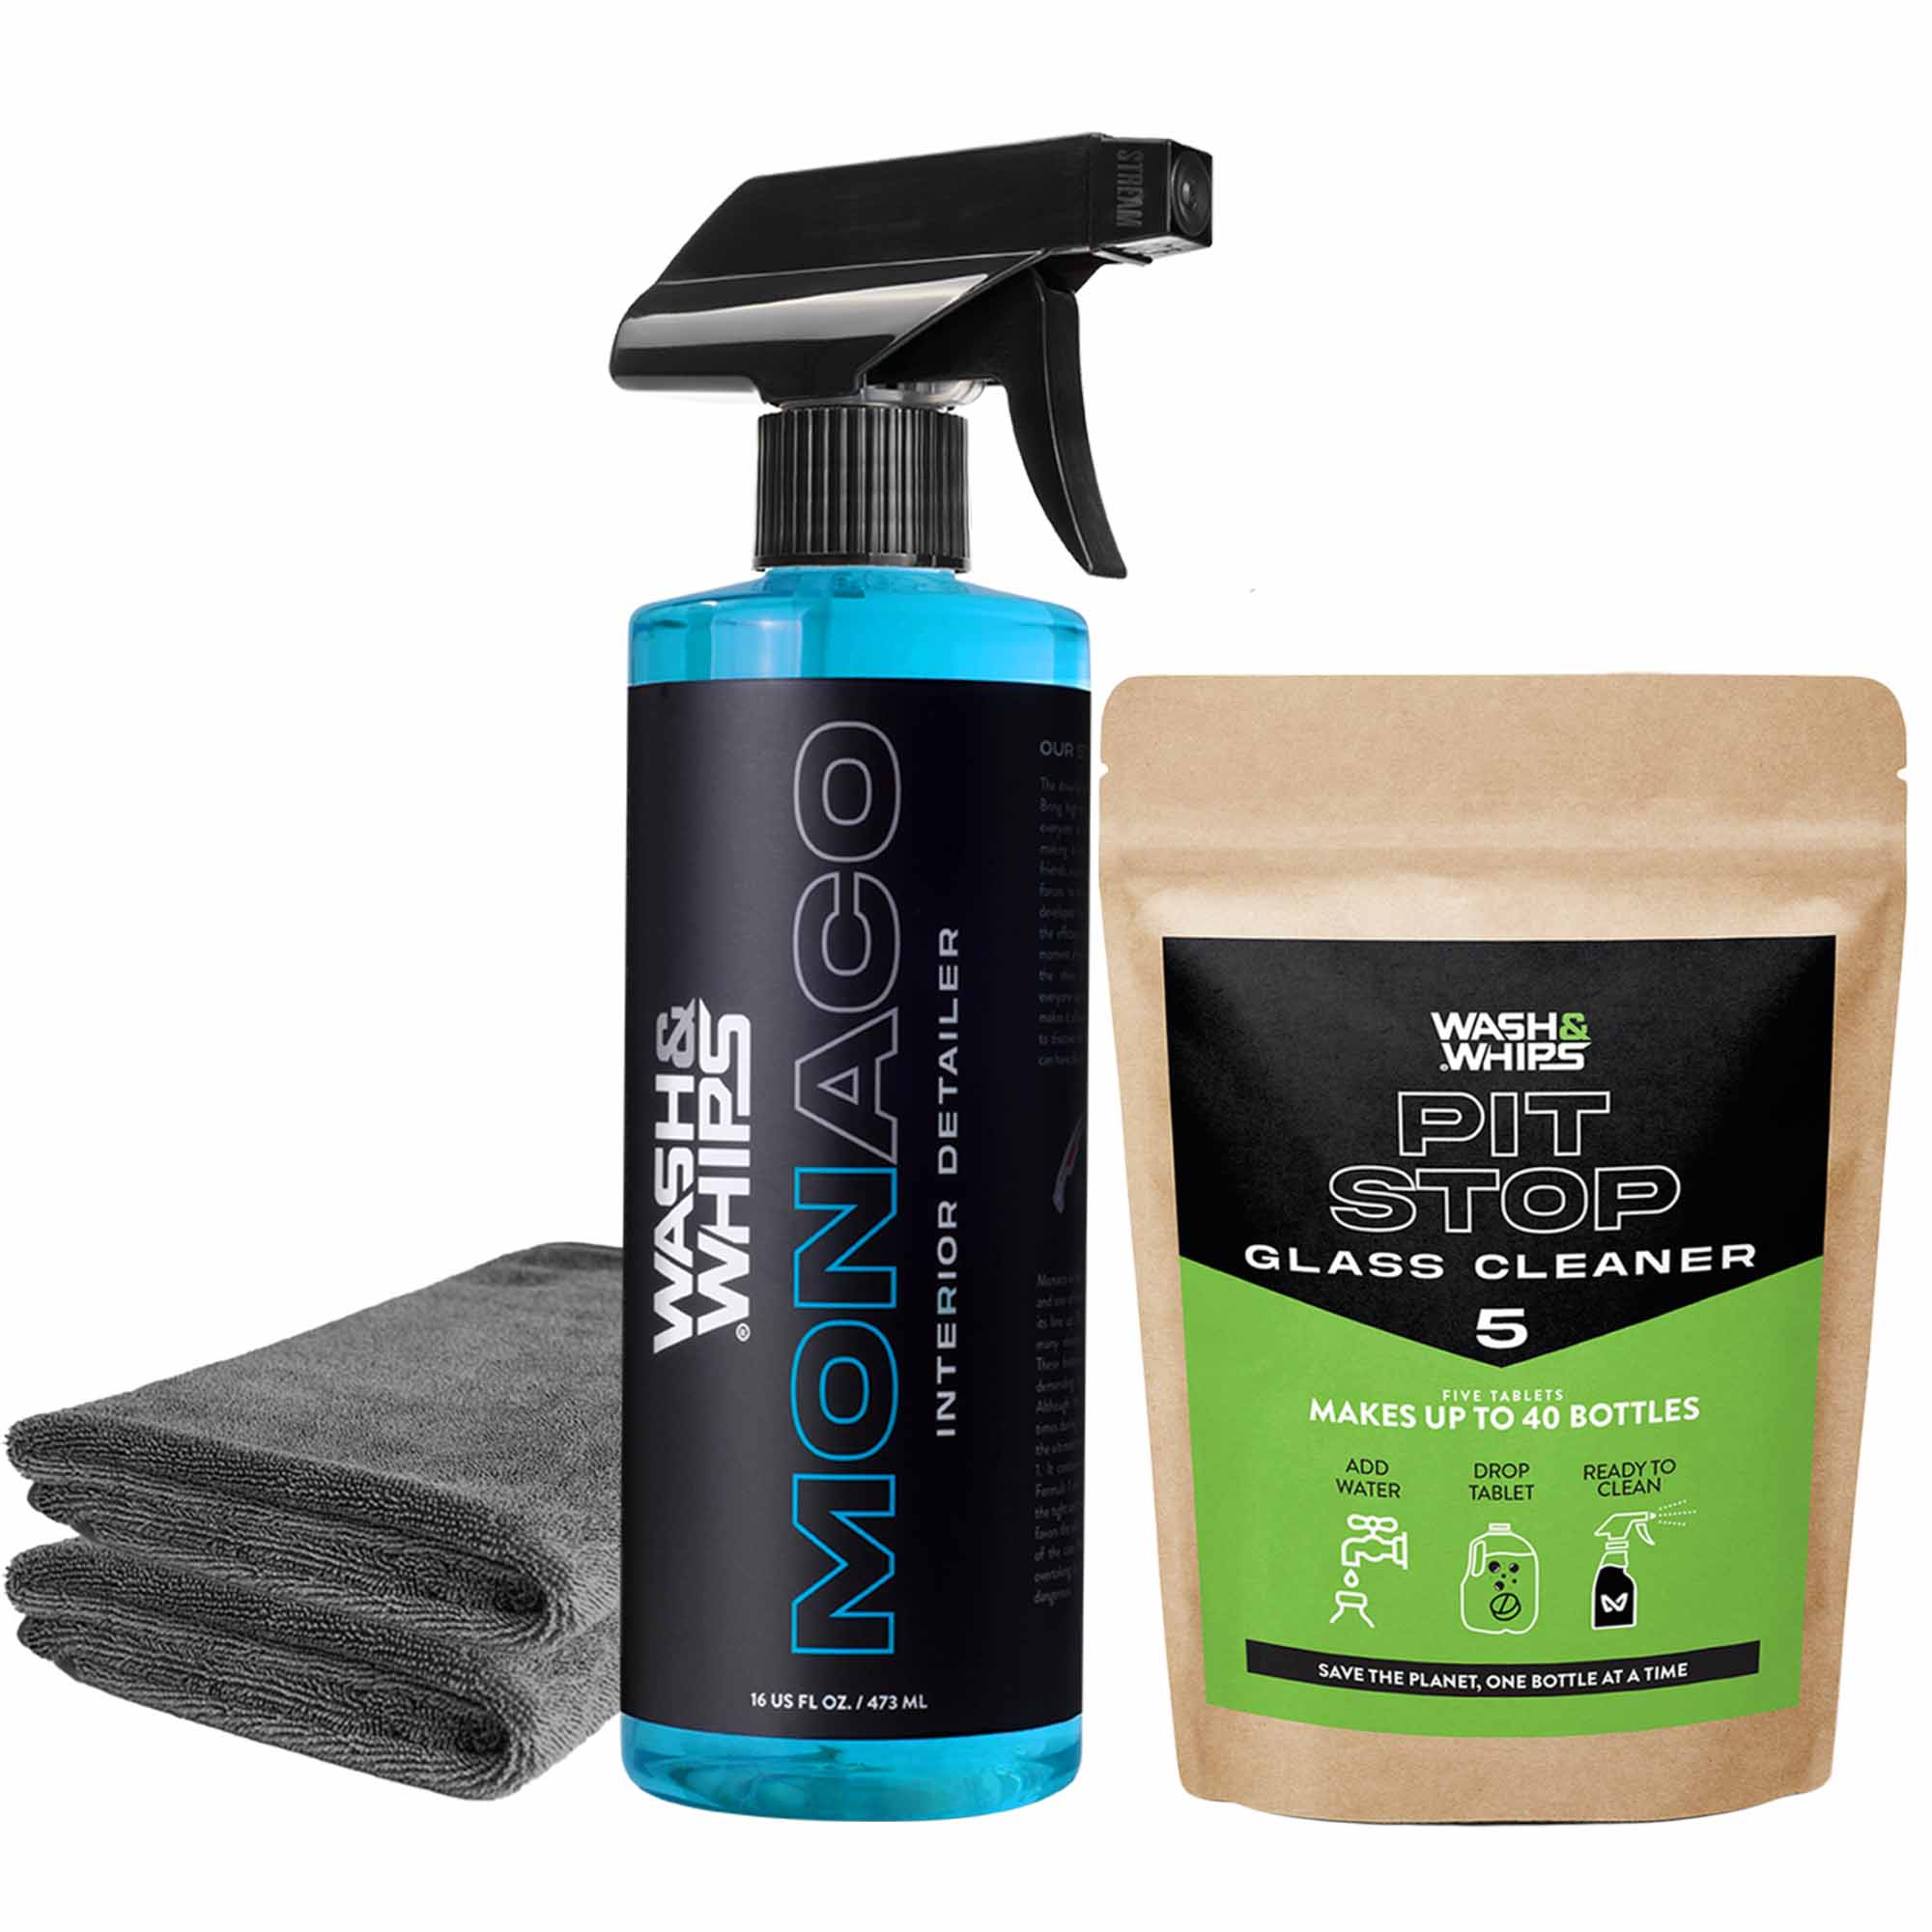 New Car Care Kit [Add to Cart to Redeem The Promo]